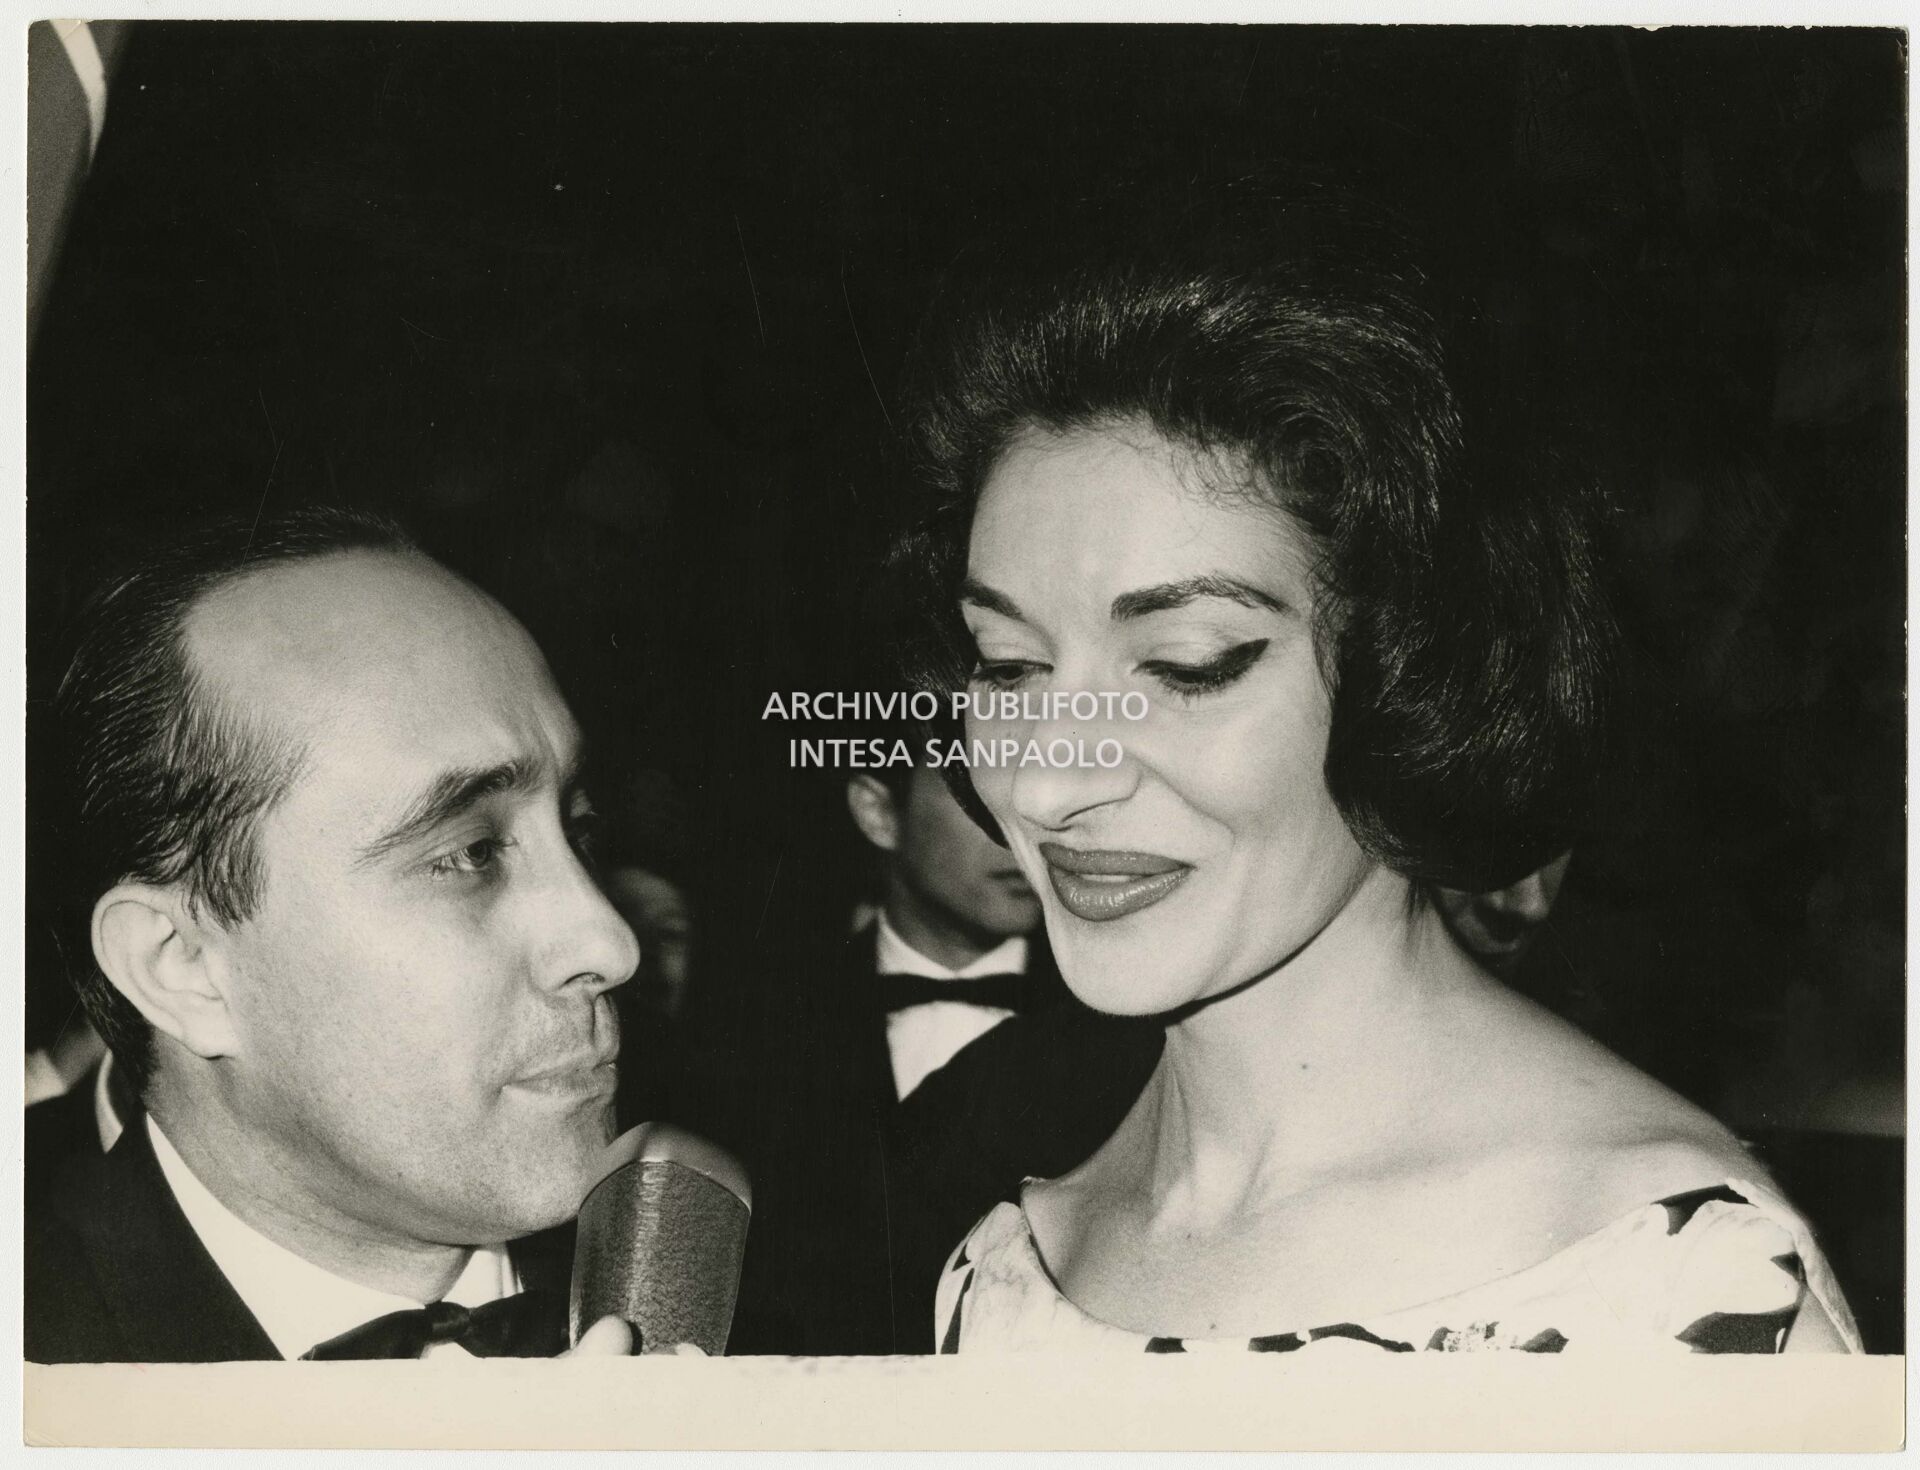 Maria Callas interviewed by Lello Bersani at the Cannes Film Festival